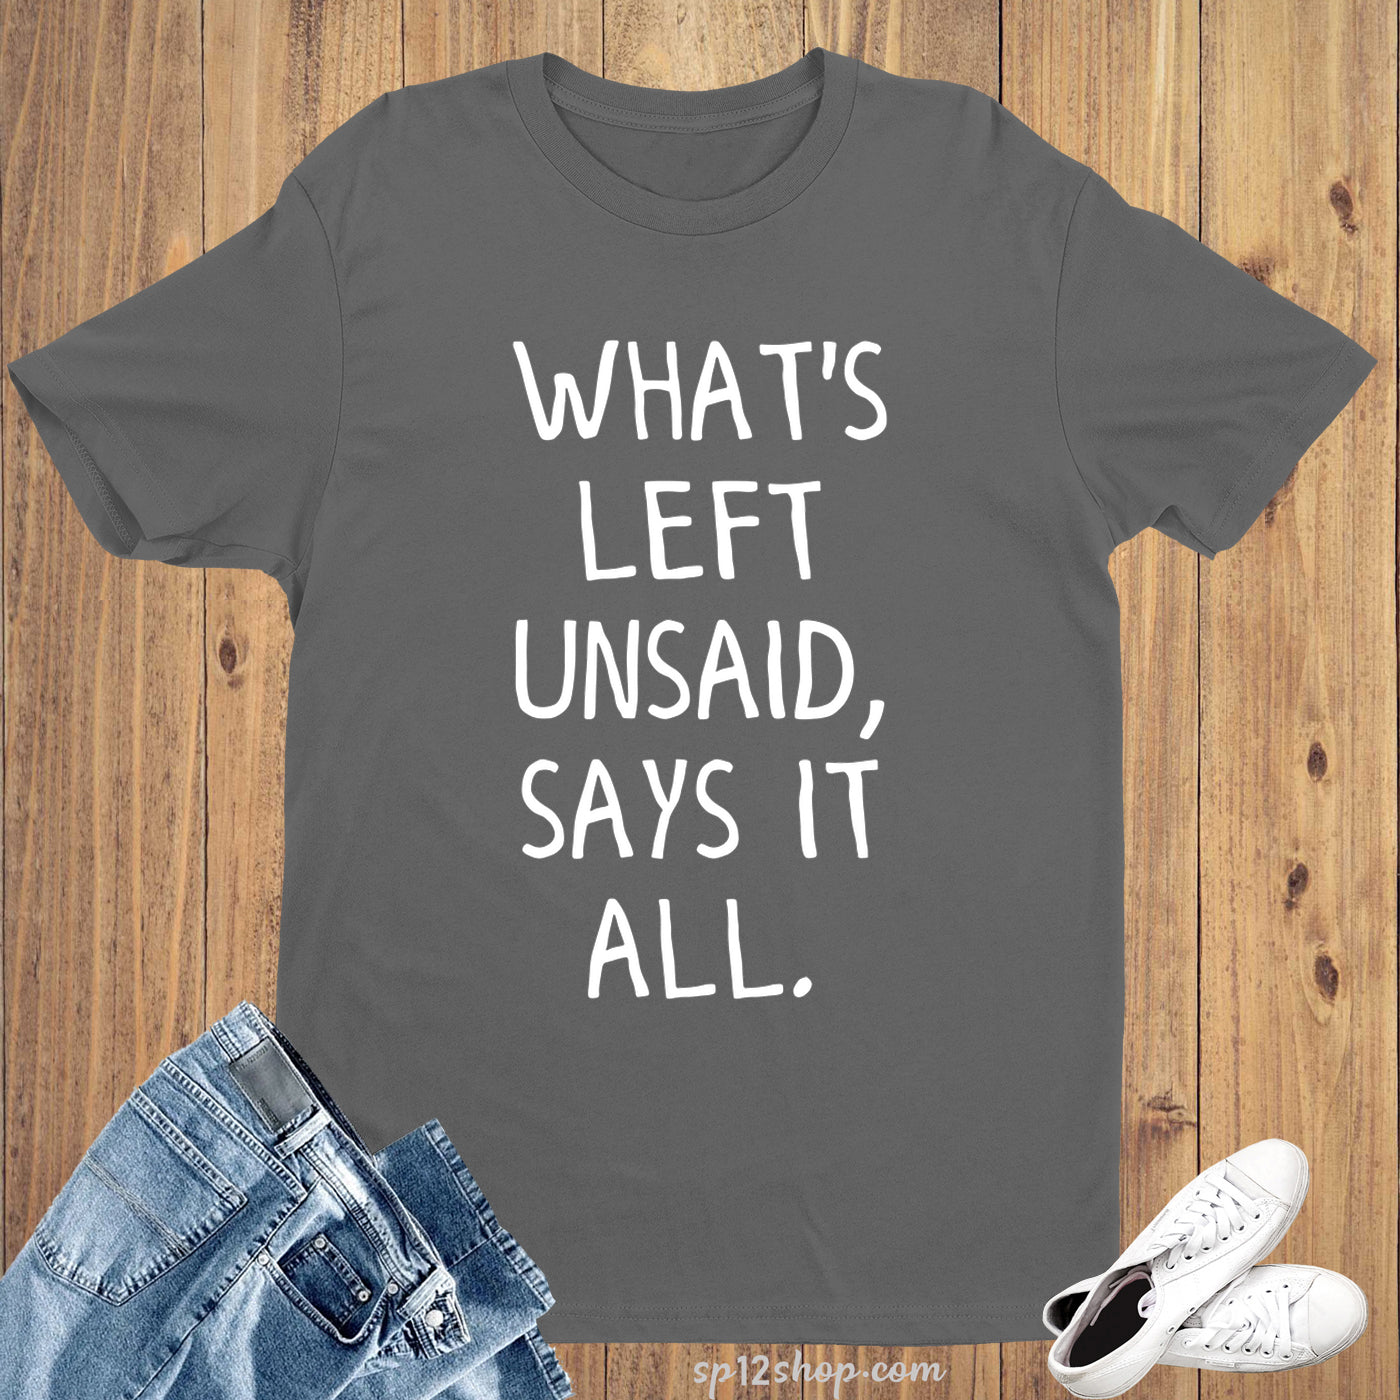 Gym Fitness T Shirt Left Unsaid Says All Witty Quote Clever